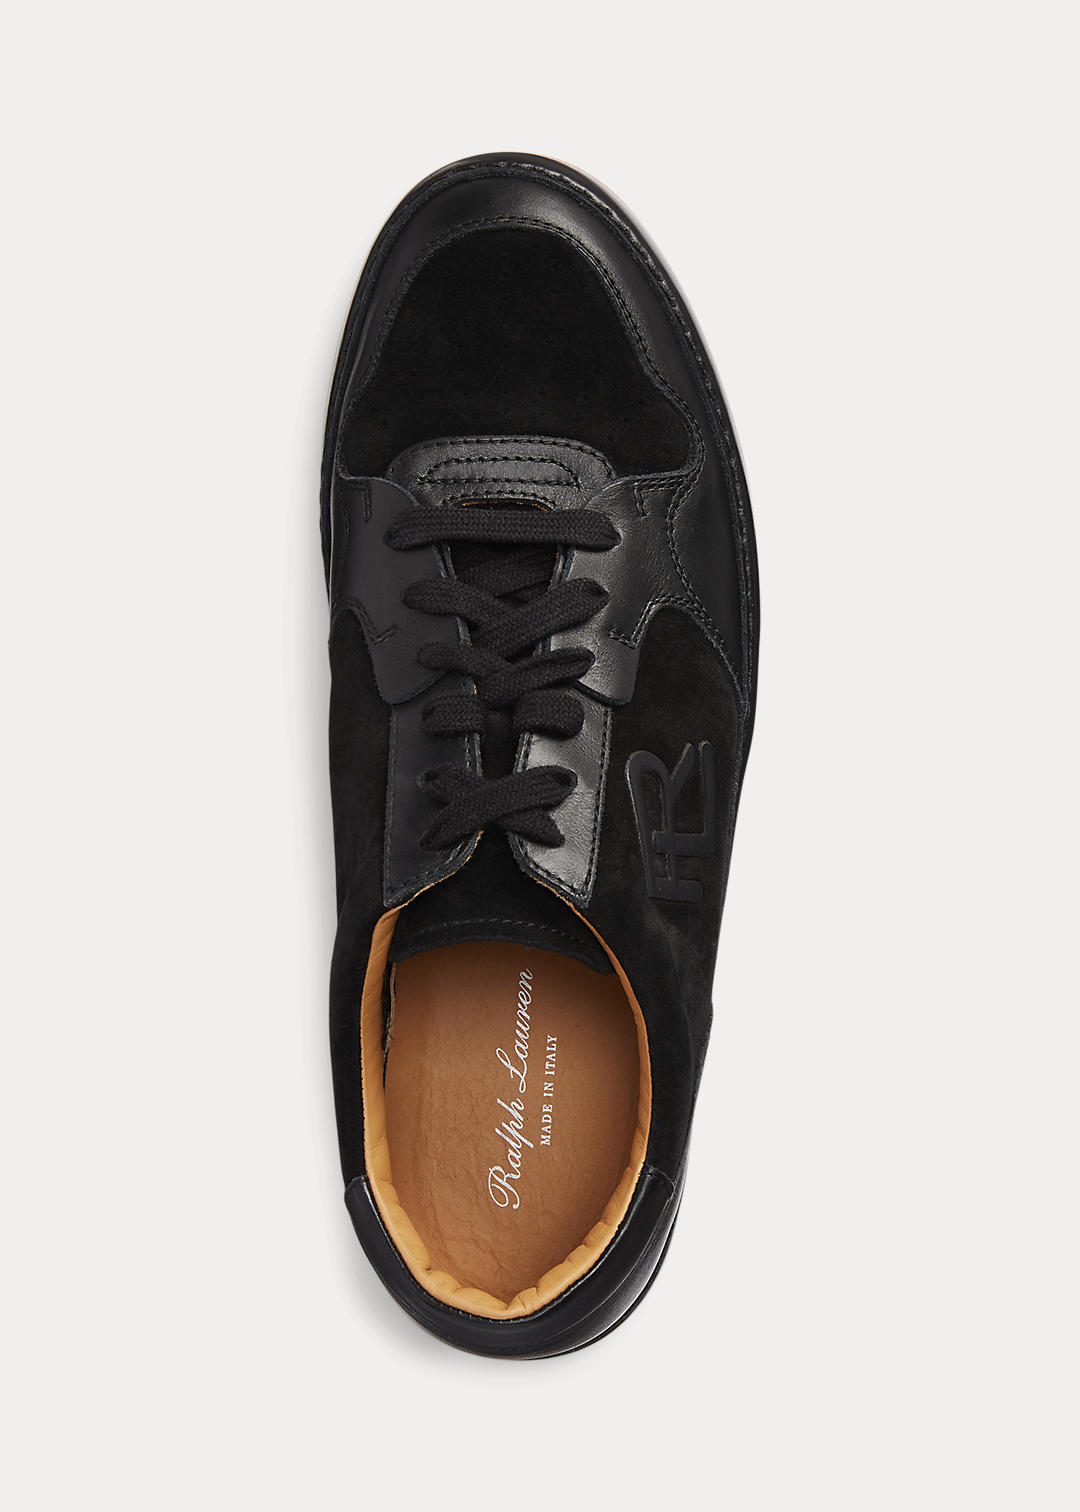 Ralph Lauren Collection Jinett Suede and Leather Low-Top Trainer 4